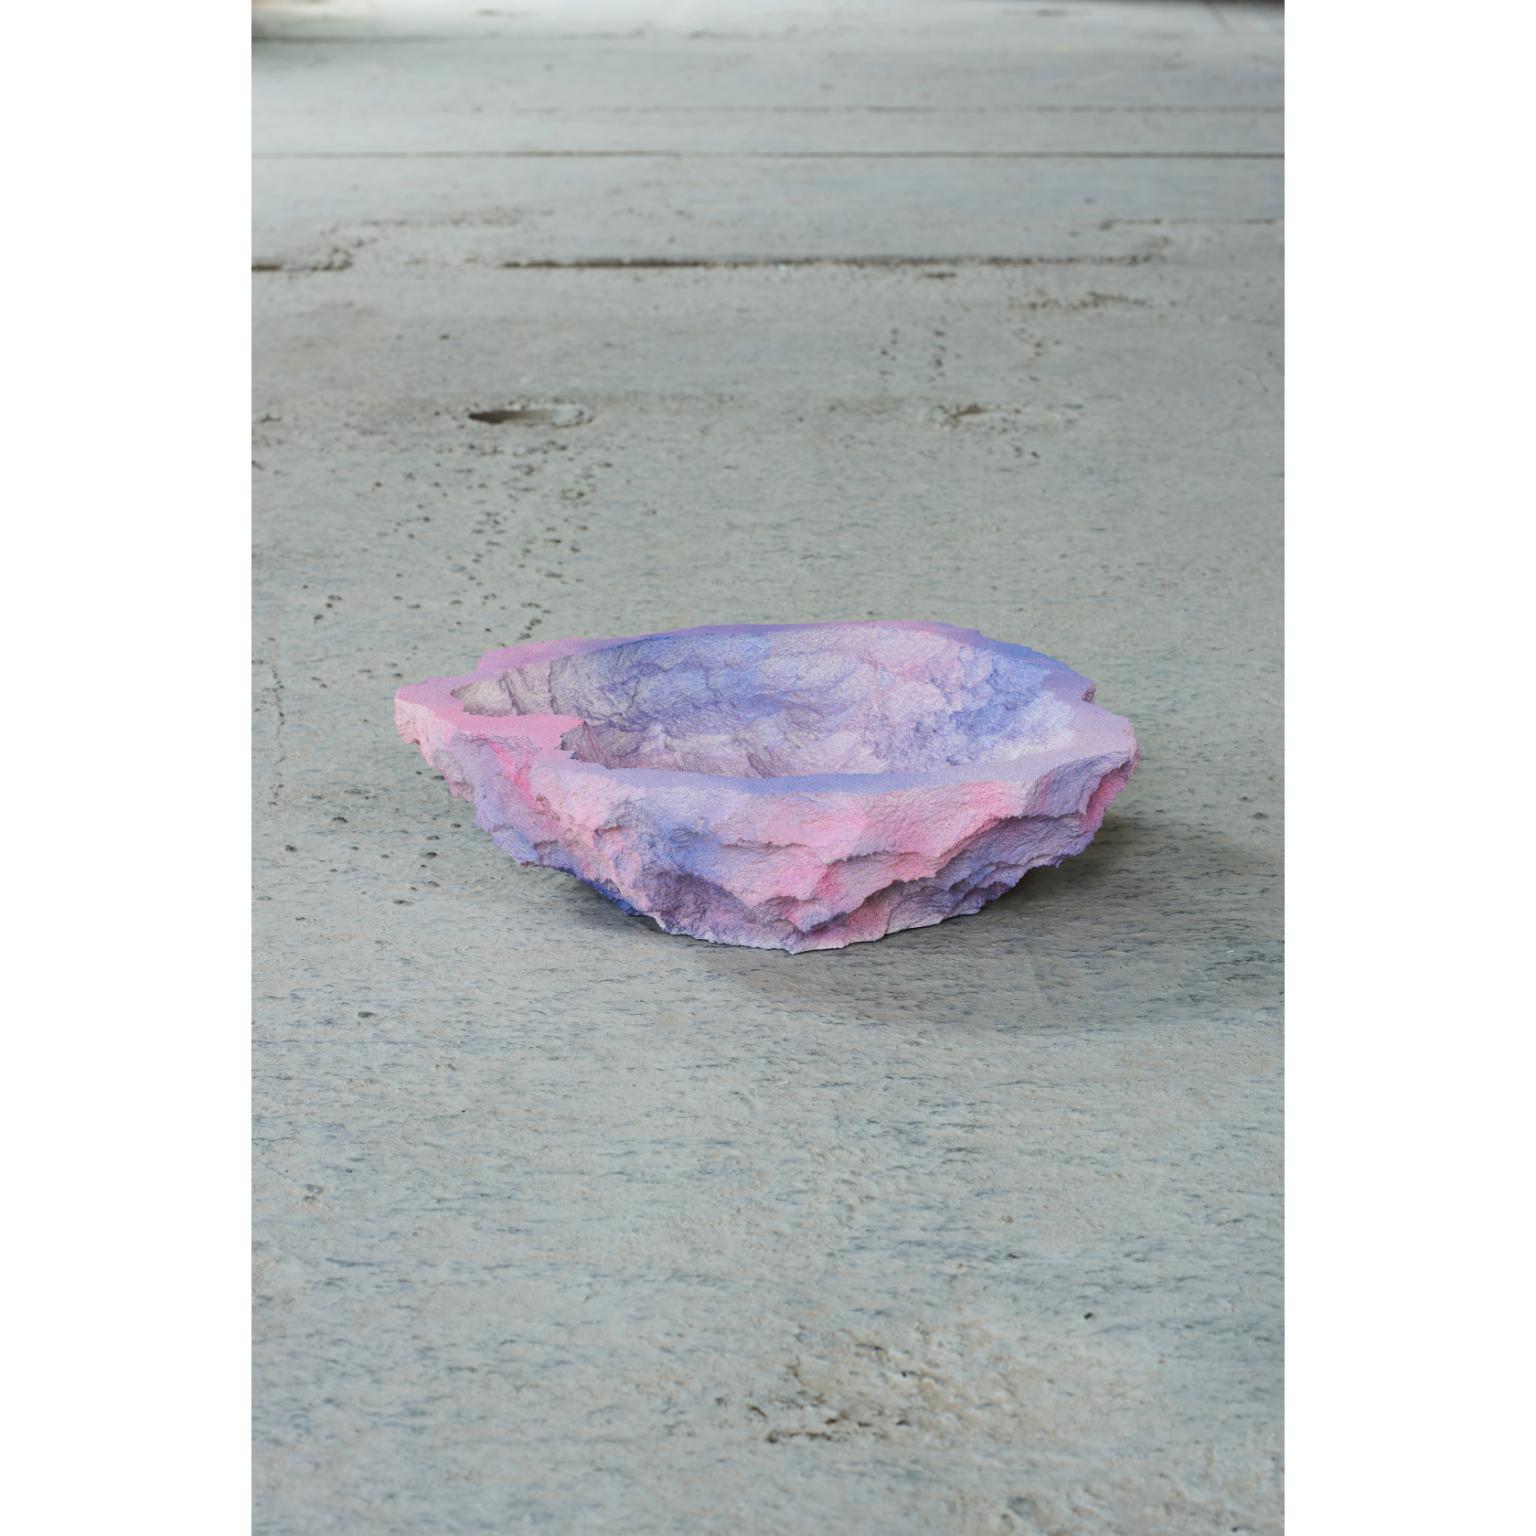 Crystal rock bowl by Andredottir & Bobek
Dimensions: W 11 x H 30 cm
Materials: Reused foam/mattress and jesmontite hardner in color purple/pink fade

Artificial Nature is a collaboration between the artist and design duo Josephine Andredottir